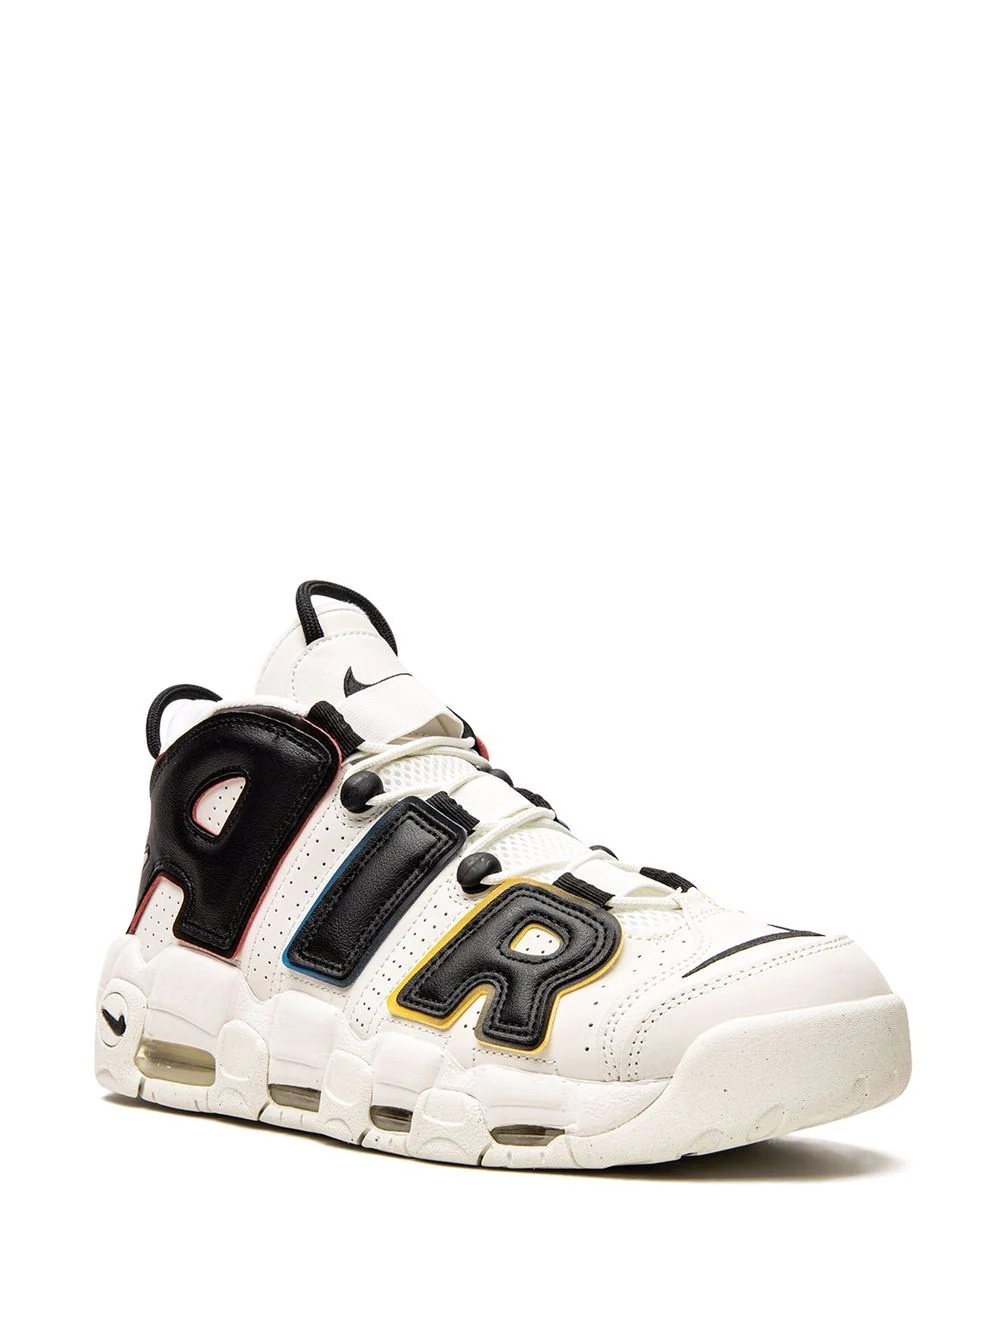 Air More Uptempo "Primary Colors" sneakers - 2